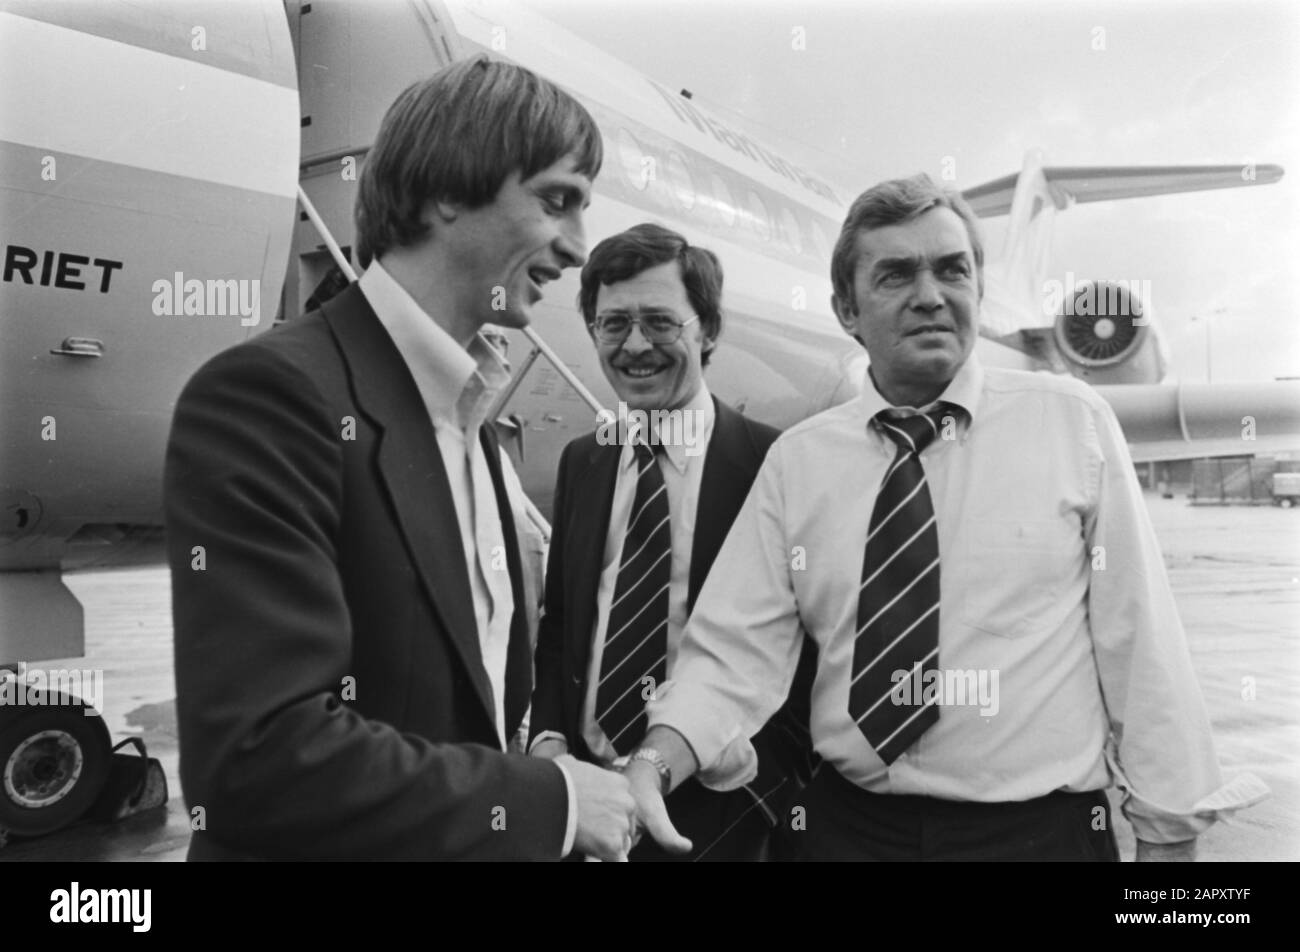 Departure Dutch team from Schiphol to Northern Ireland Cruijff (l) with trainer Happel Date: 10 October 1977 Location: Noord-Holland, Schiphol Keywords: sport, trainers, football Personal name : Cruijff, Johan Stock Photo